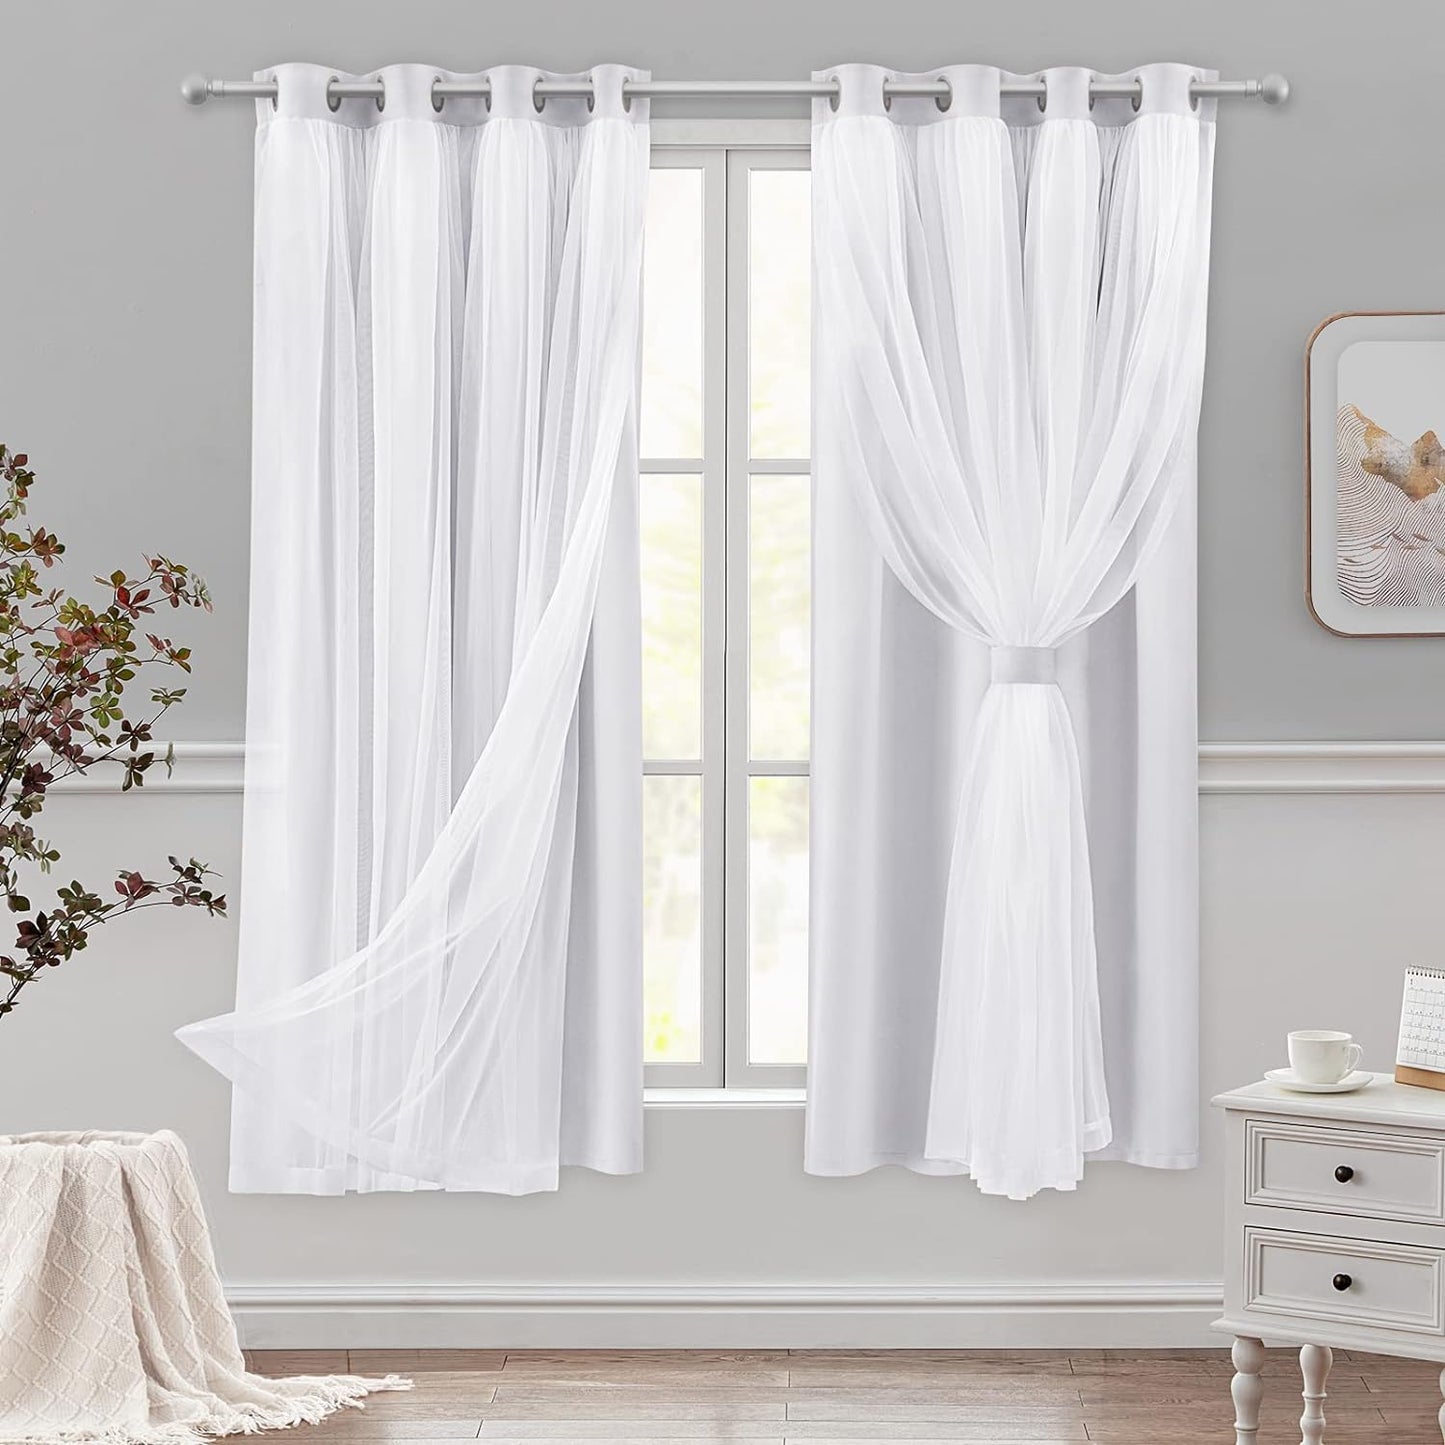 HOMEIDEAS Double Layer Curtains Light Grey Blackout Curtains 84 Inch Length 2 Panels Nursery Curtains for Girls Kids Bedroom Grommet Blackout Curtains with Sheer Overlay  HOMEIDEAS Greyish White 52" X 63" 